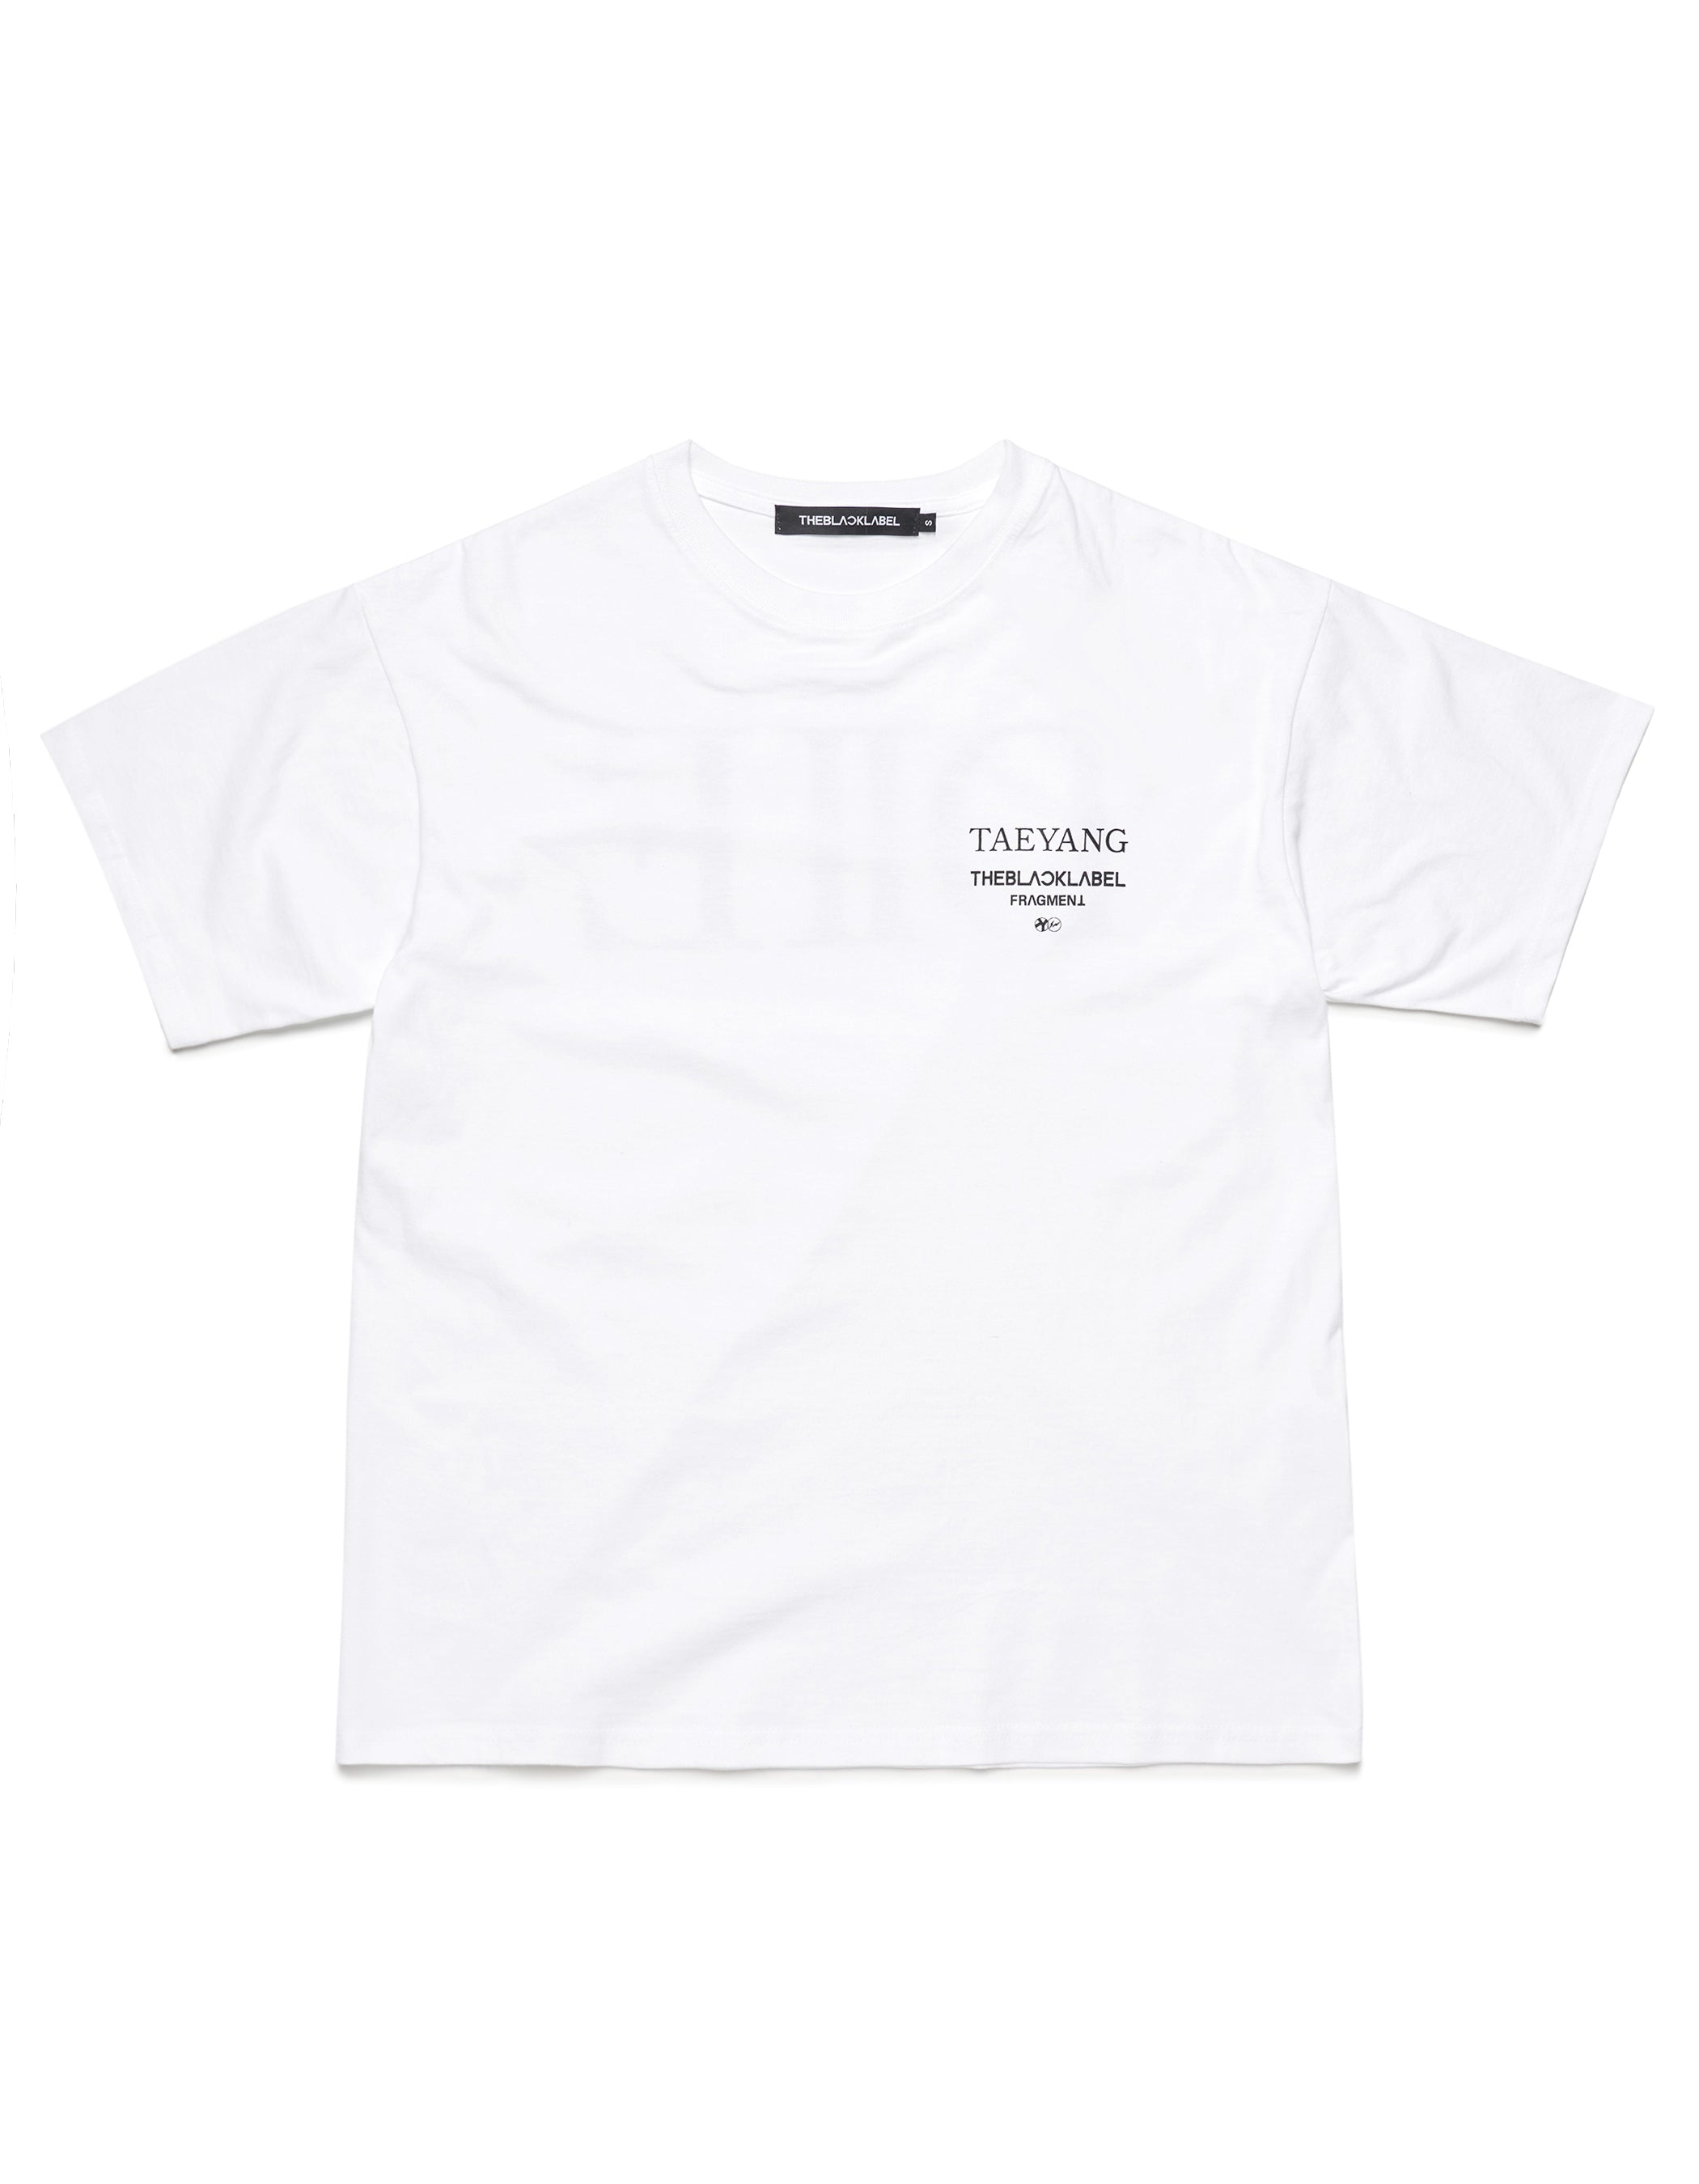 TAEYANG x Fragment Design DIIE Tee (White) Front